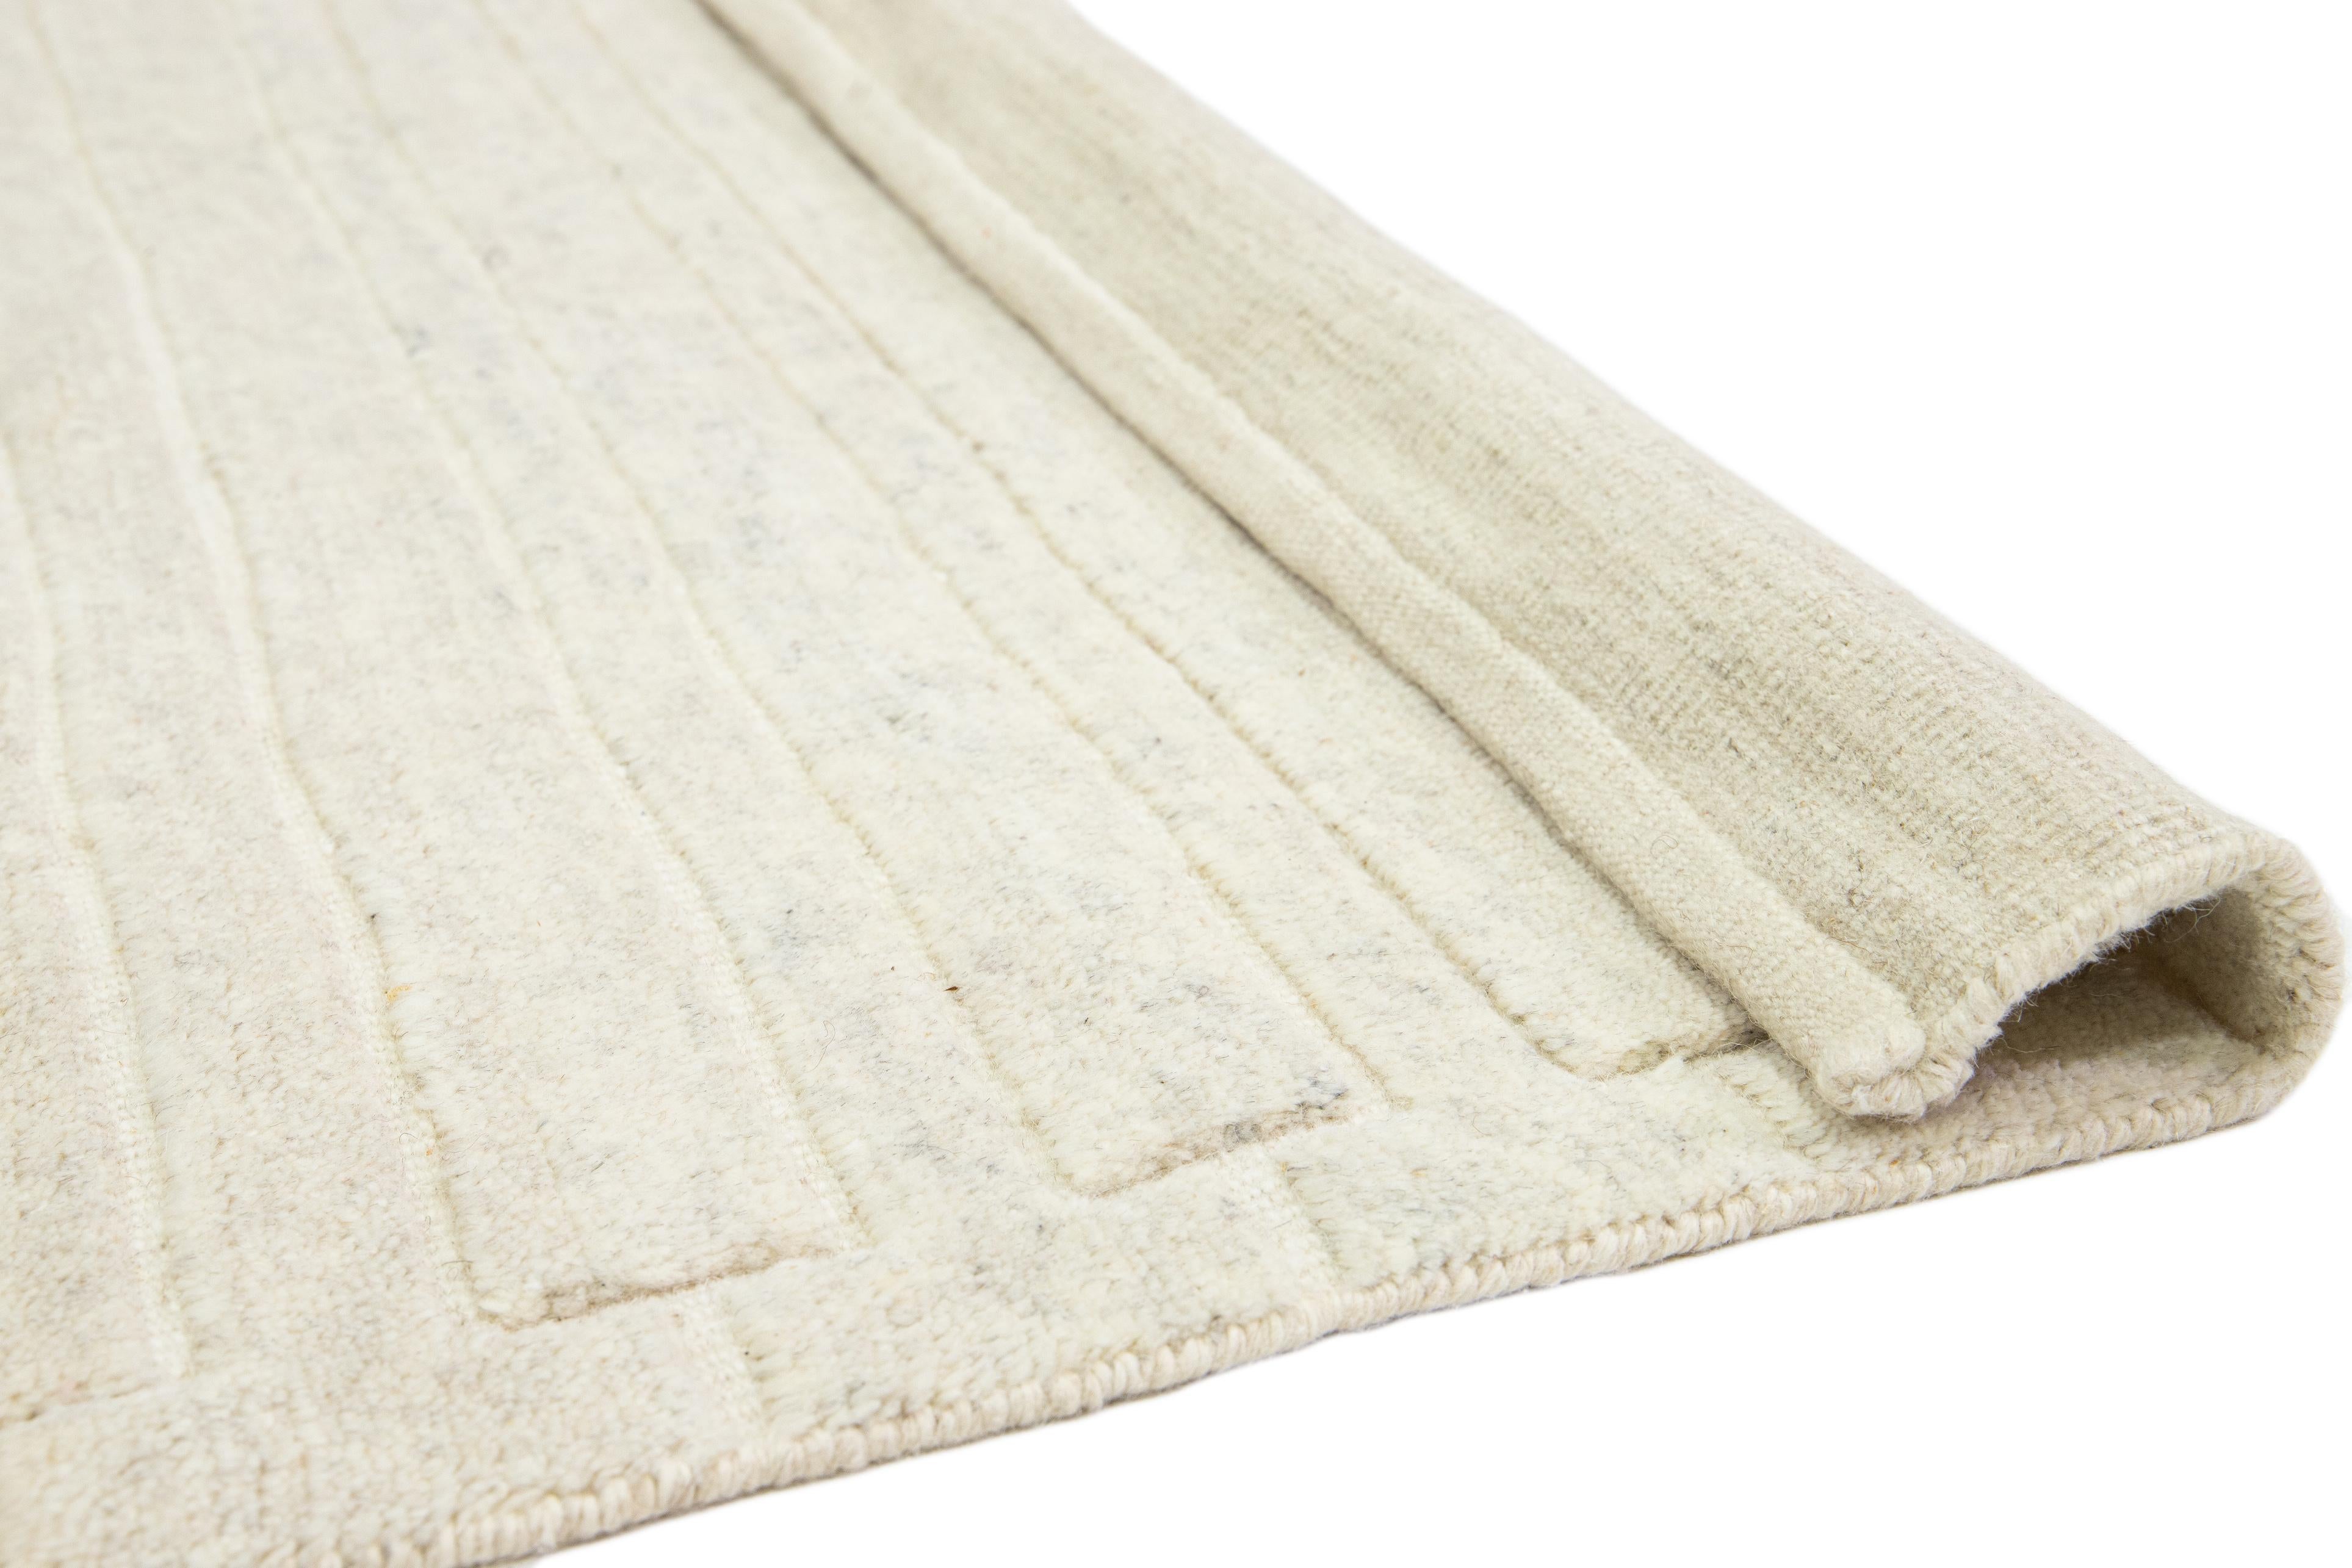 Indian Ivory Moroccan Style Contemporary Wool Rug With a Striped Pattern By Apadana For Sale